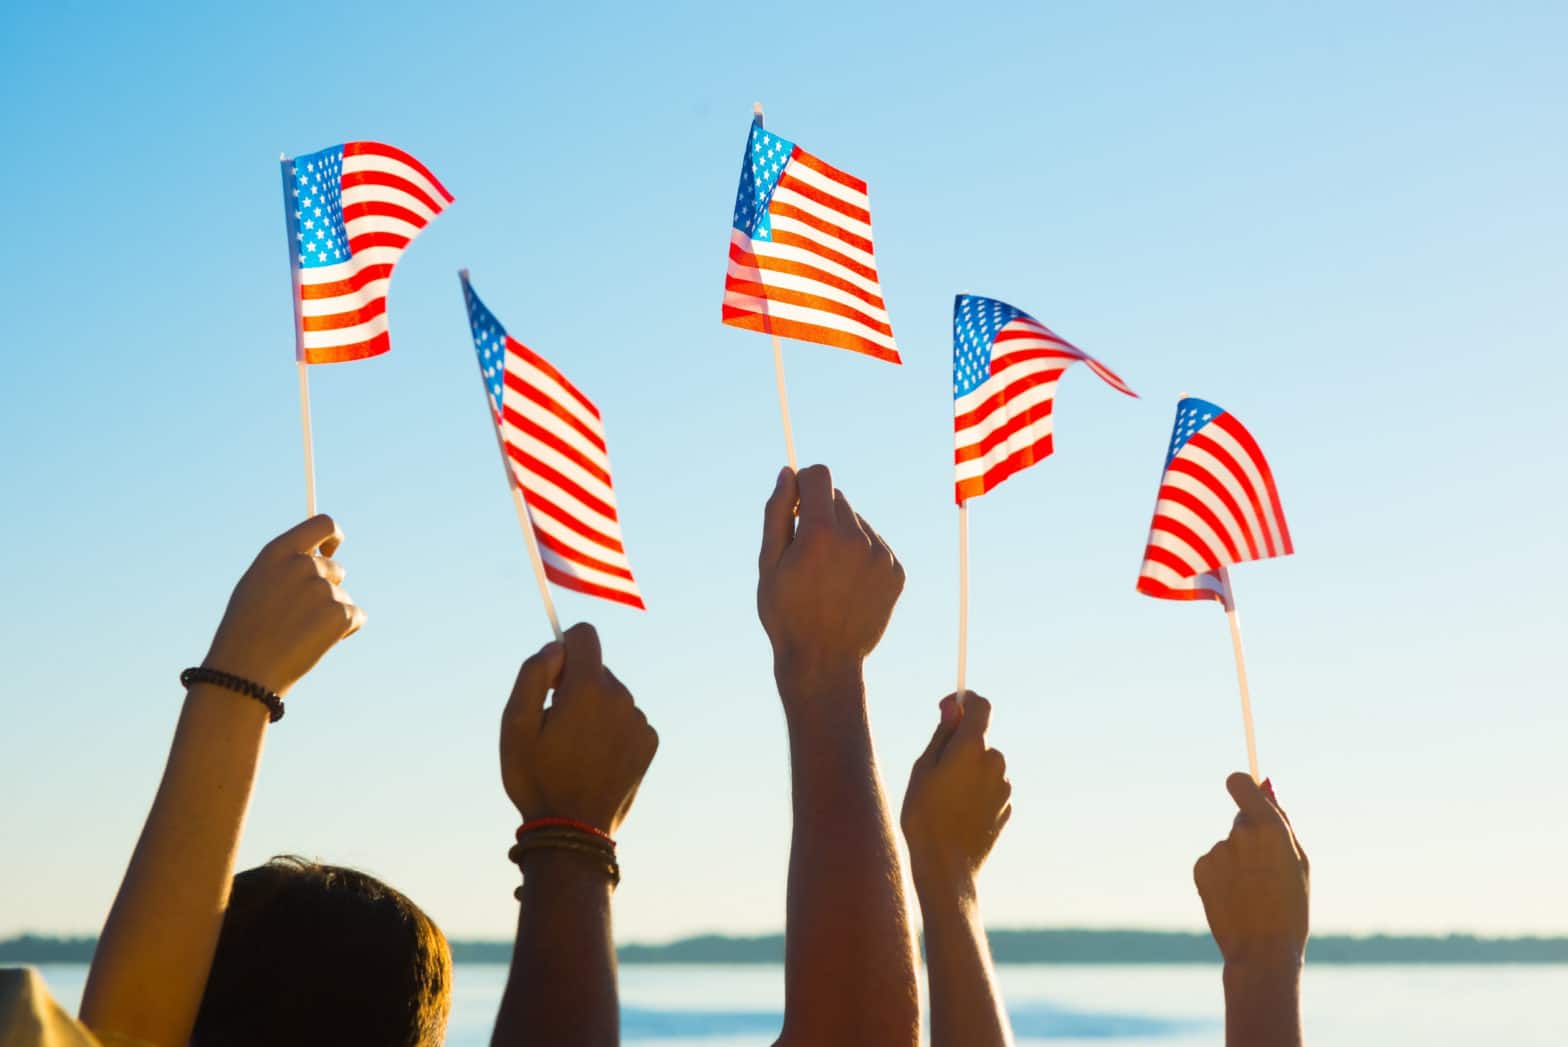 Brand Principles are the foundation for a country, a business, structures, disciplines & habits, a brand. (American flags held up in diverse hands)